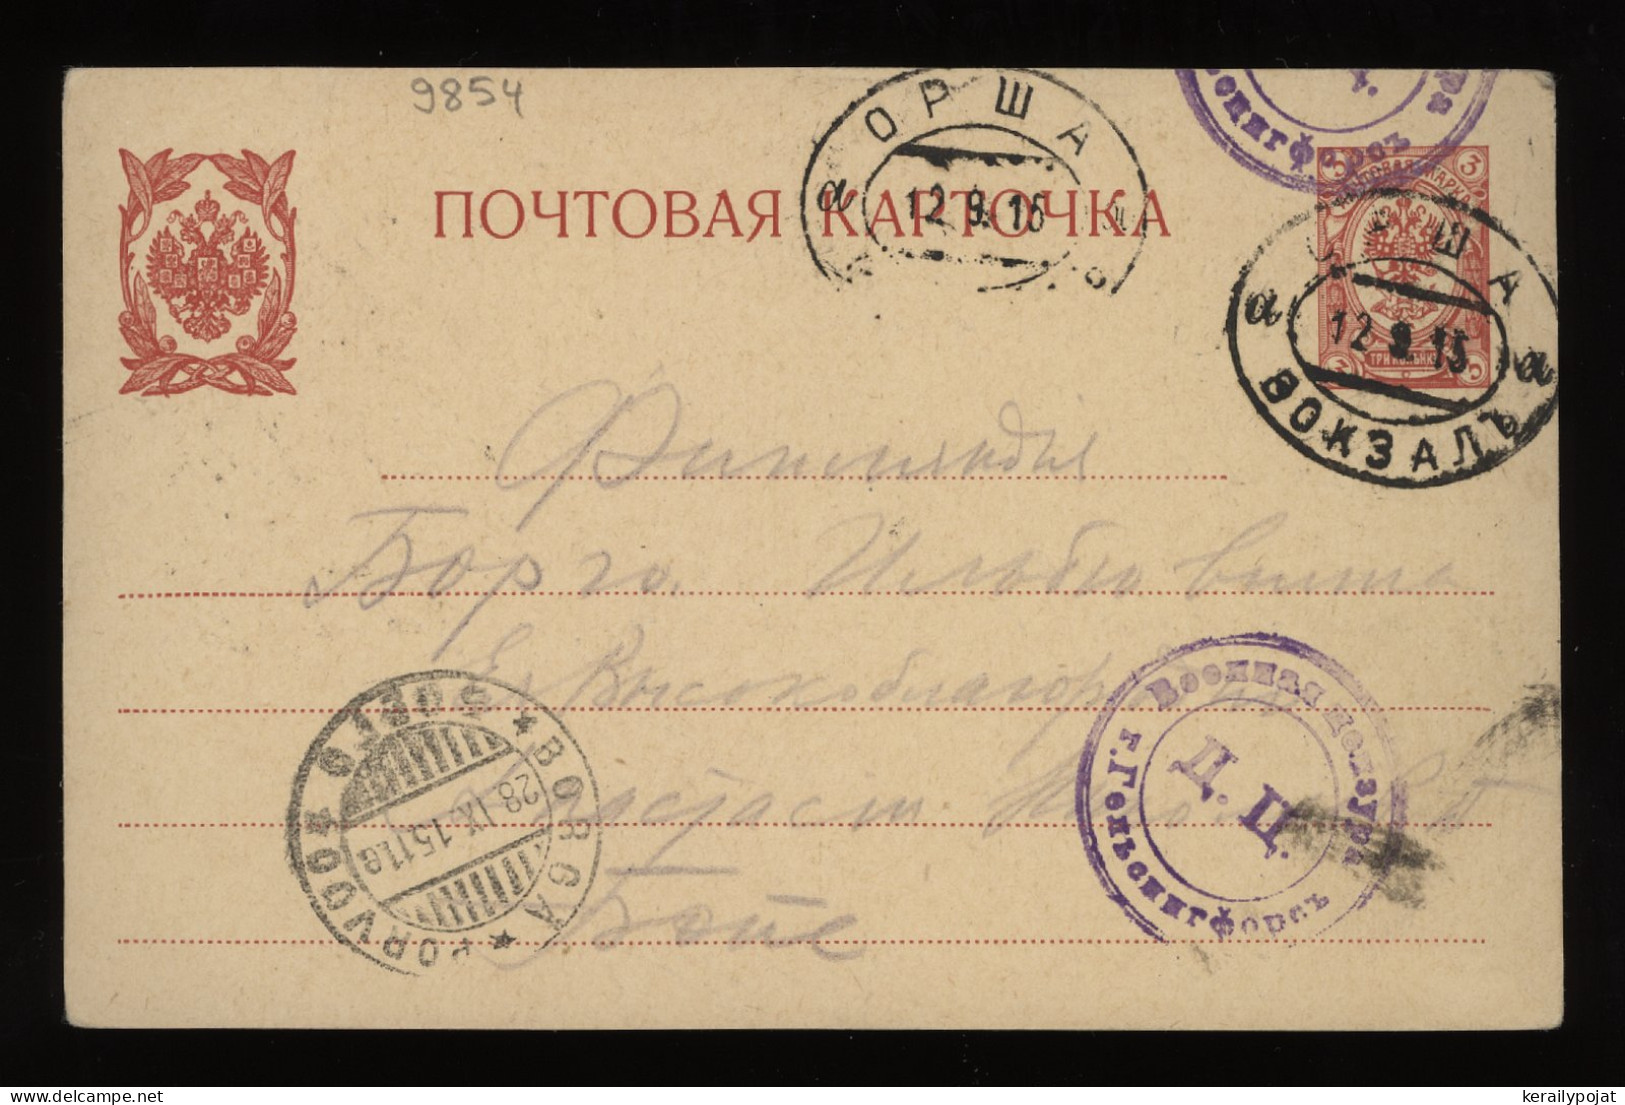 Russia 1915 3k Red Stationery Card To Finland__(9854) - Entiers Postaux